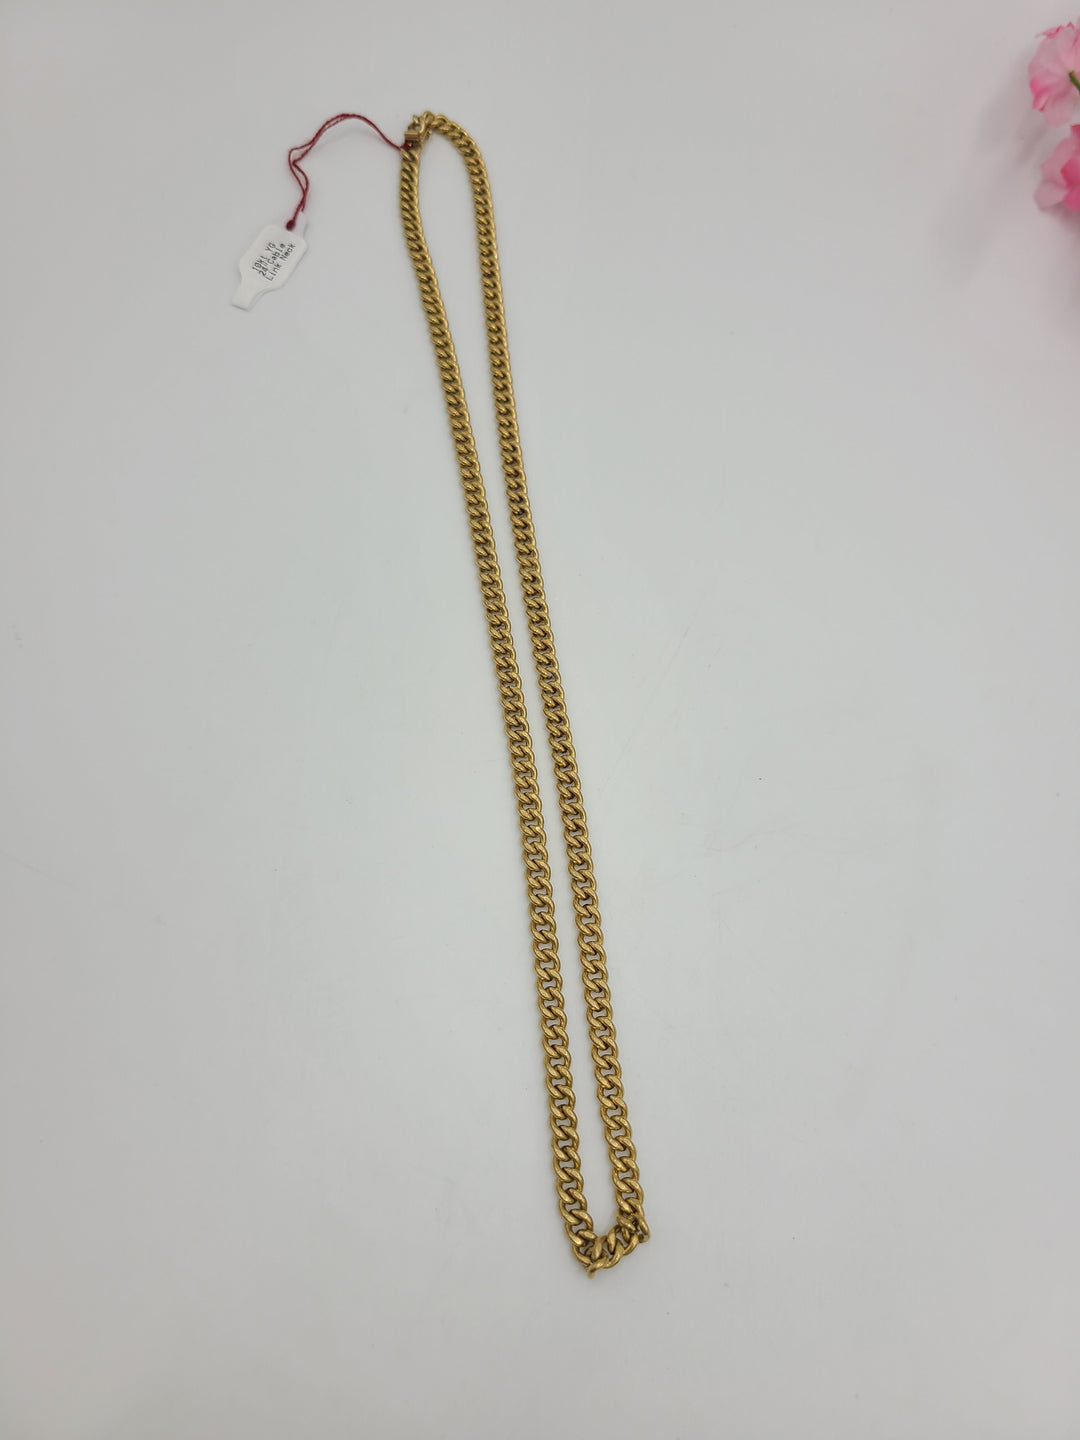 k732 Sturdy Unisex 10kt Yellow Gold 24" Cable Link Necklace